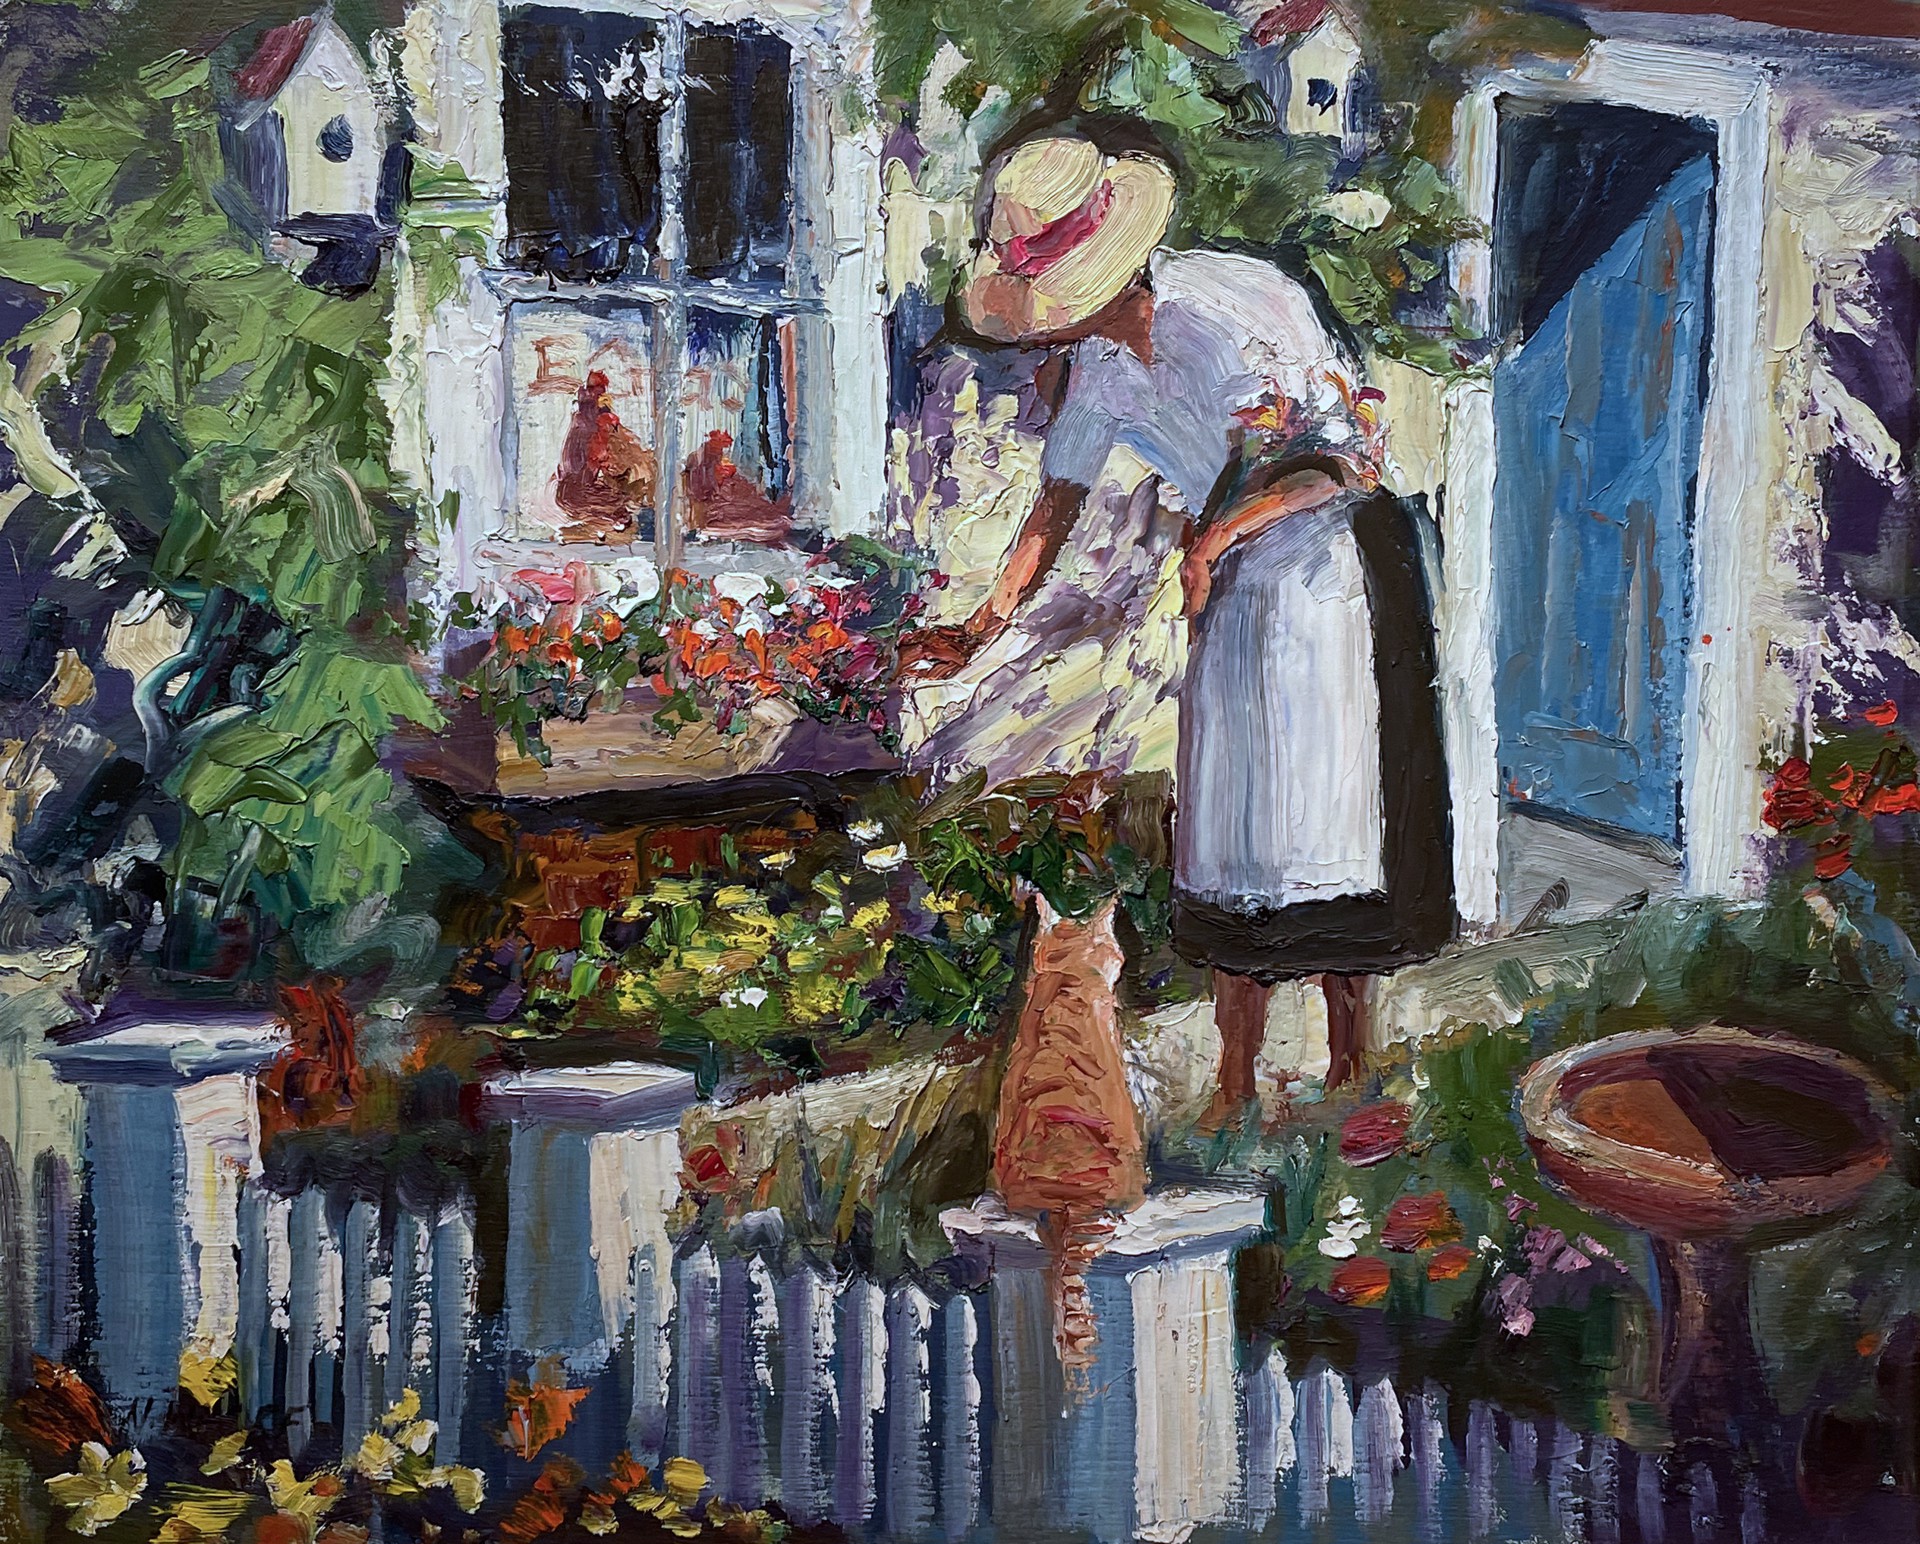 A Summer’s Day by Nancy Whorf